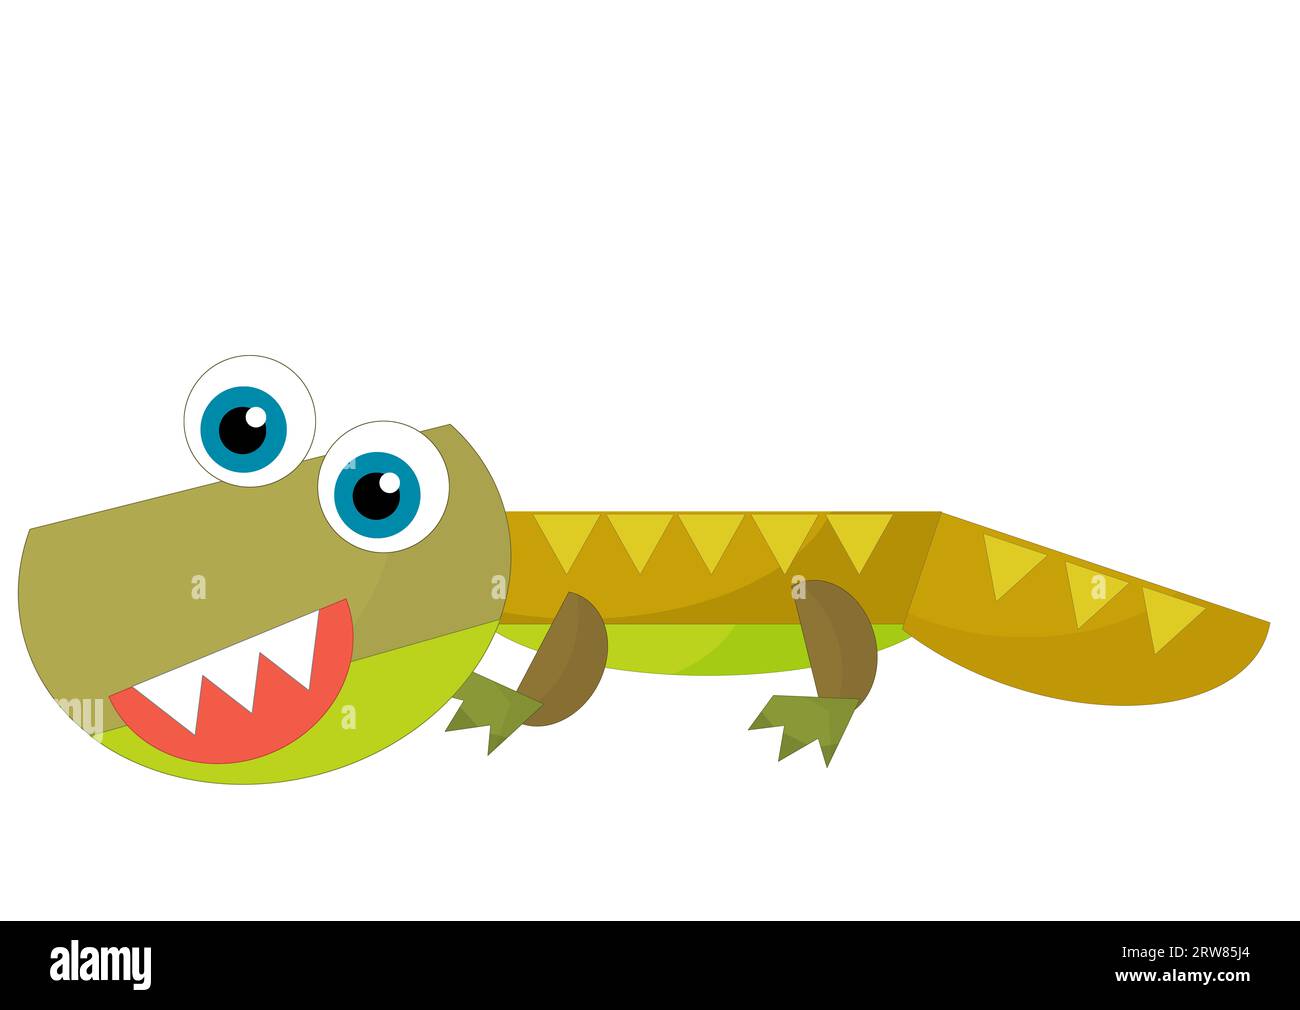 cartoon happy and funny colorful prehistoric dinosaur dino smiling friendly isolated illustration for children Stock Photo